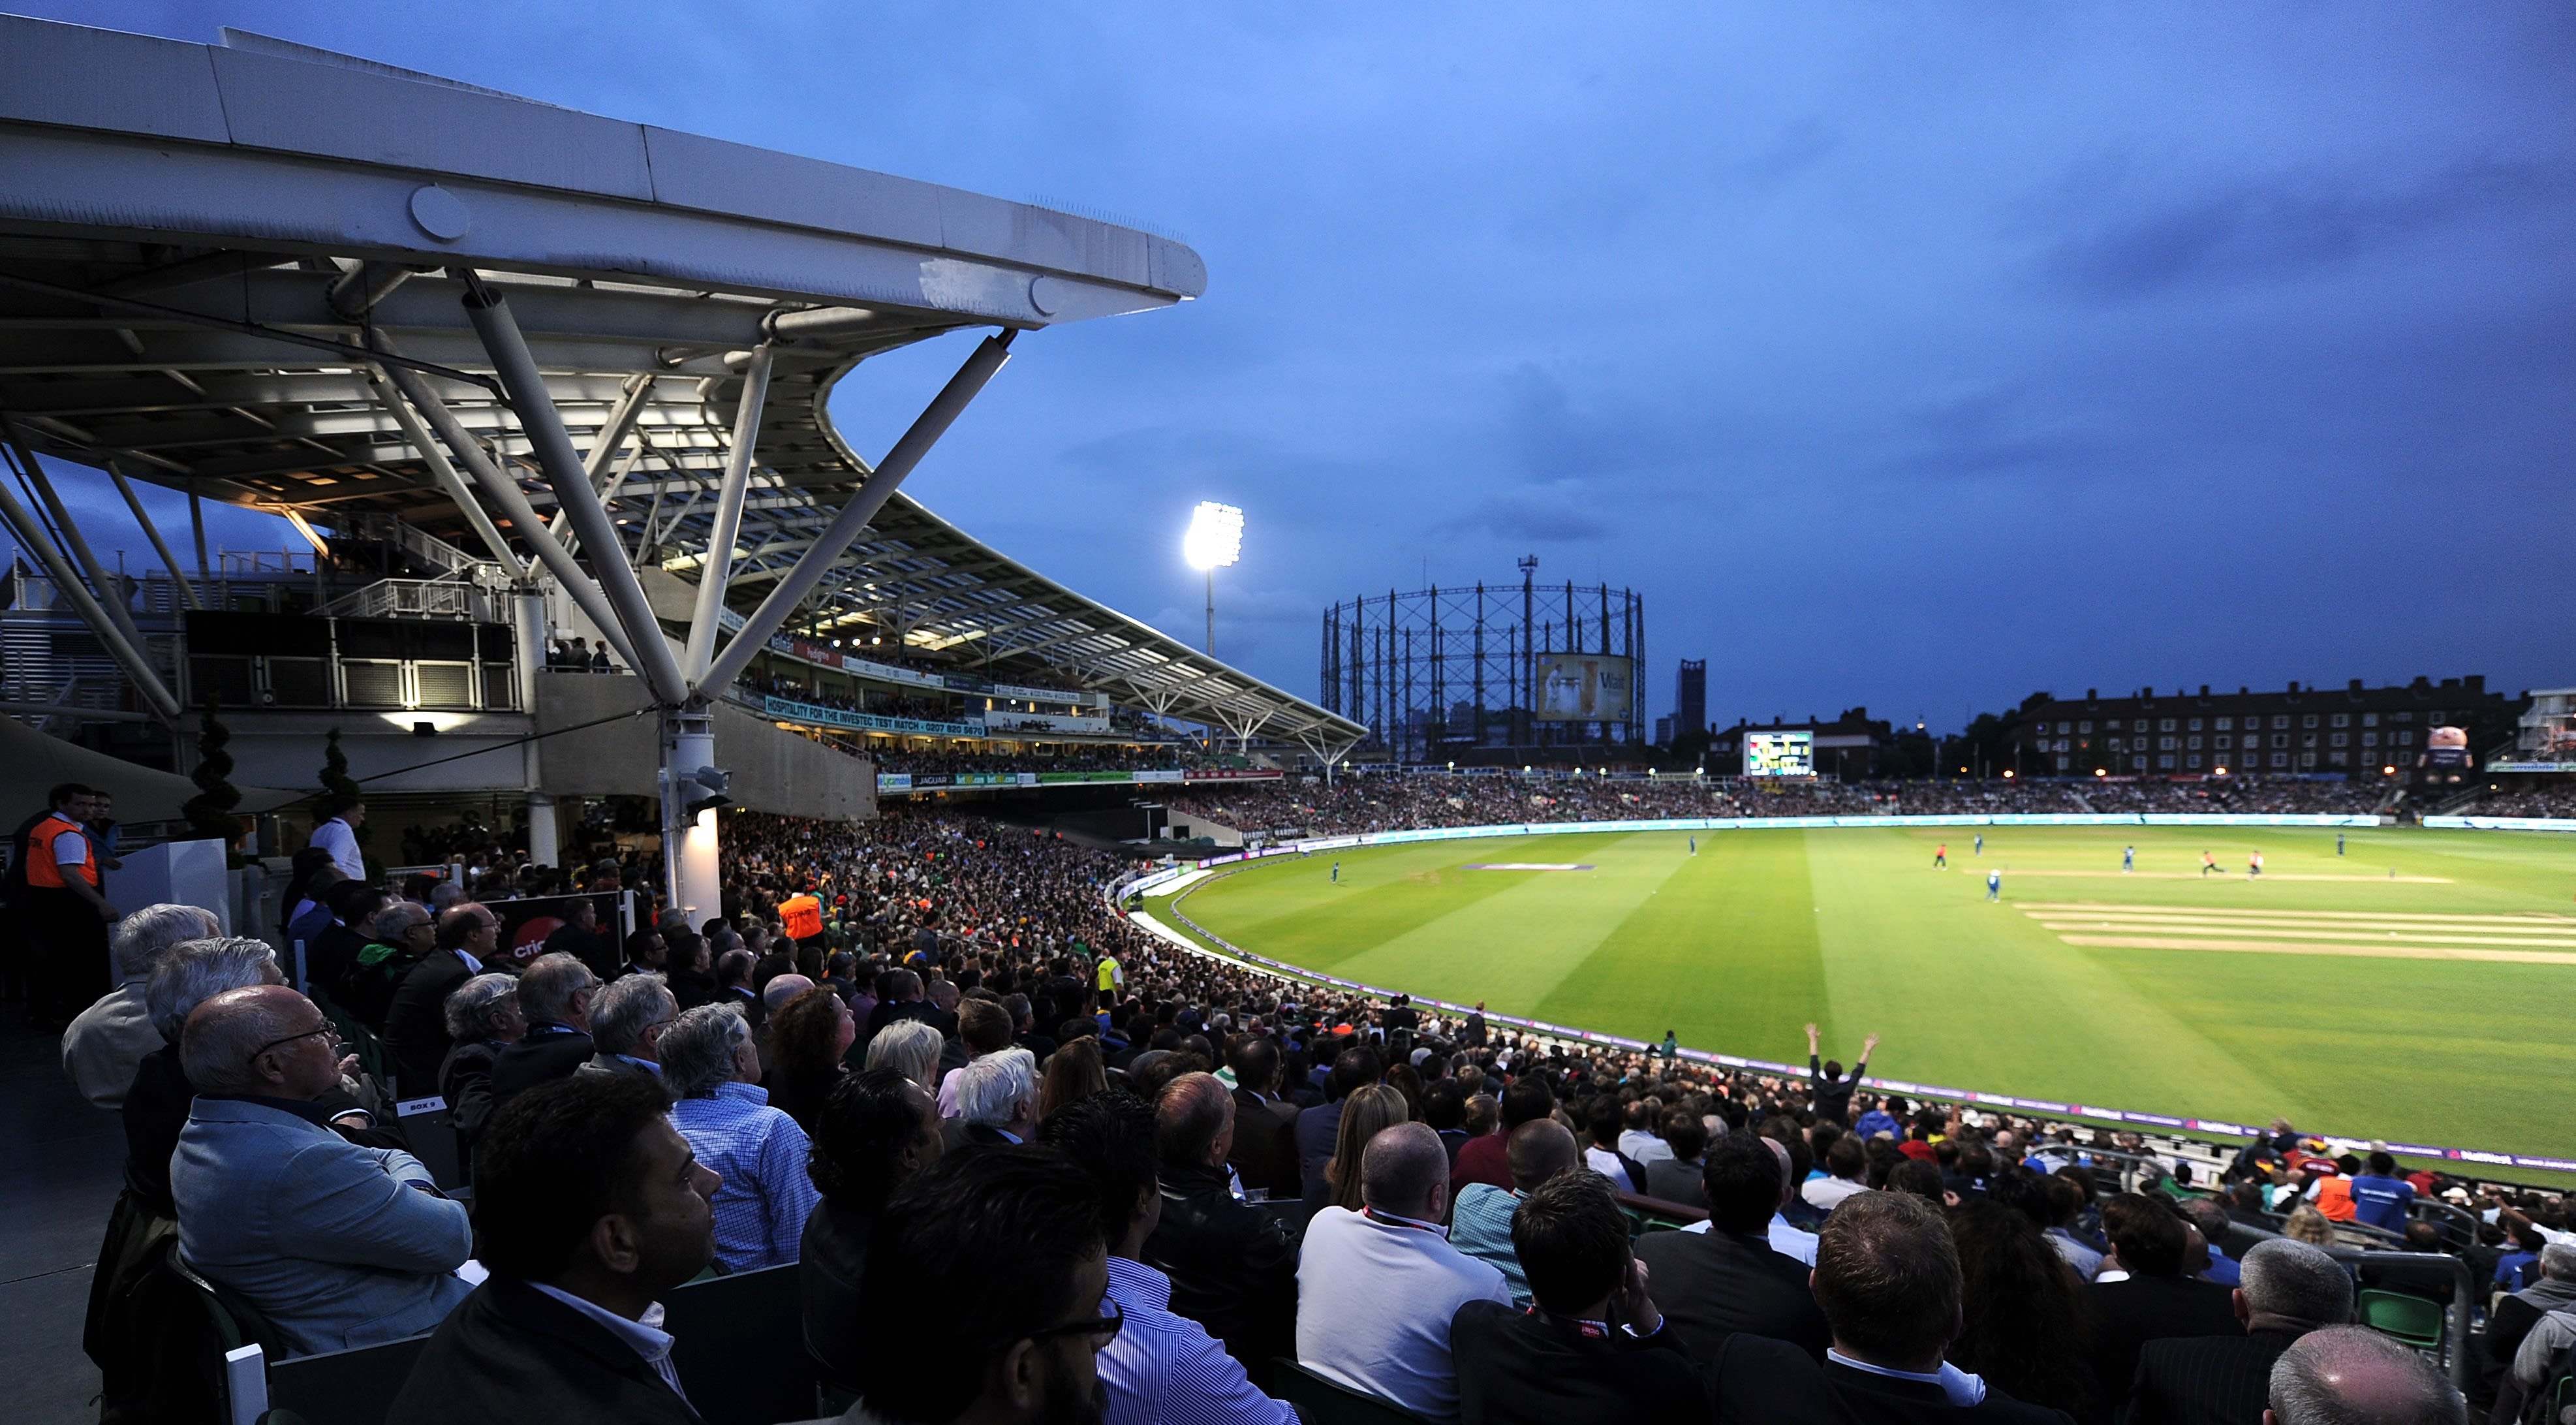 Seating and field at the Kia Oval 